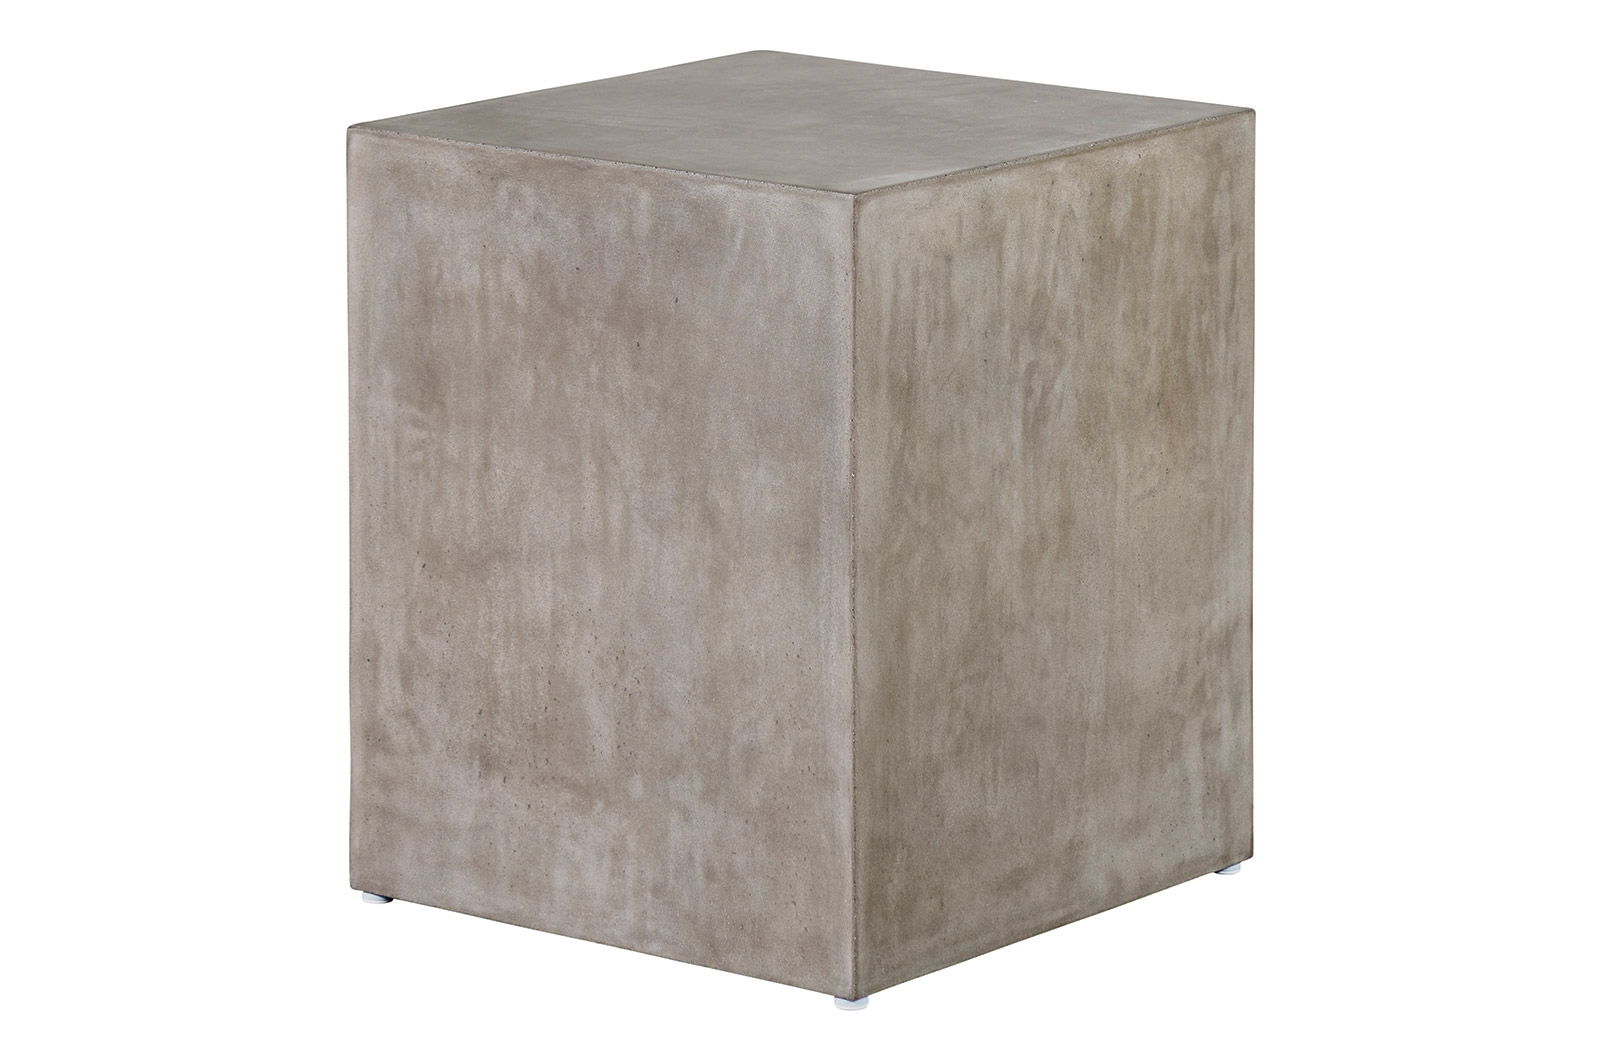 perpetual cube accent table stool perp web wood inch round holiday tablecloth piece living room set small plant ikea storage end ideas furniture tucson allen outside modern glass